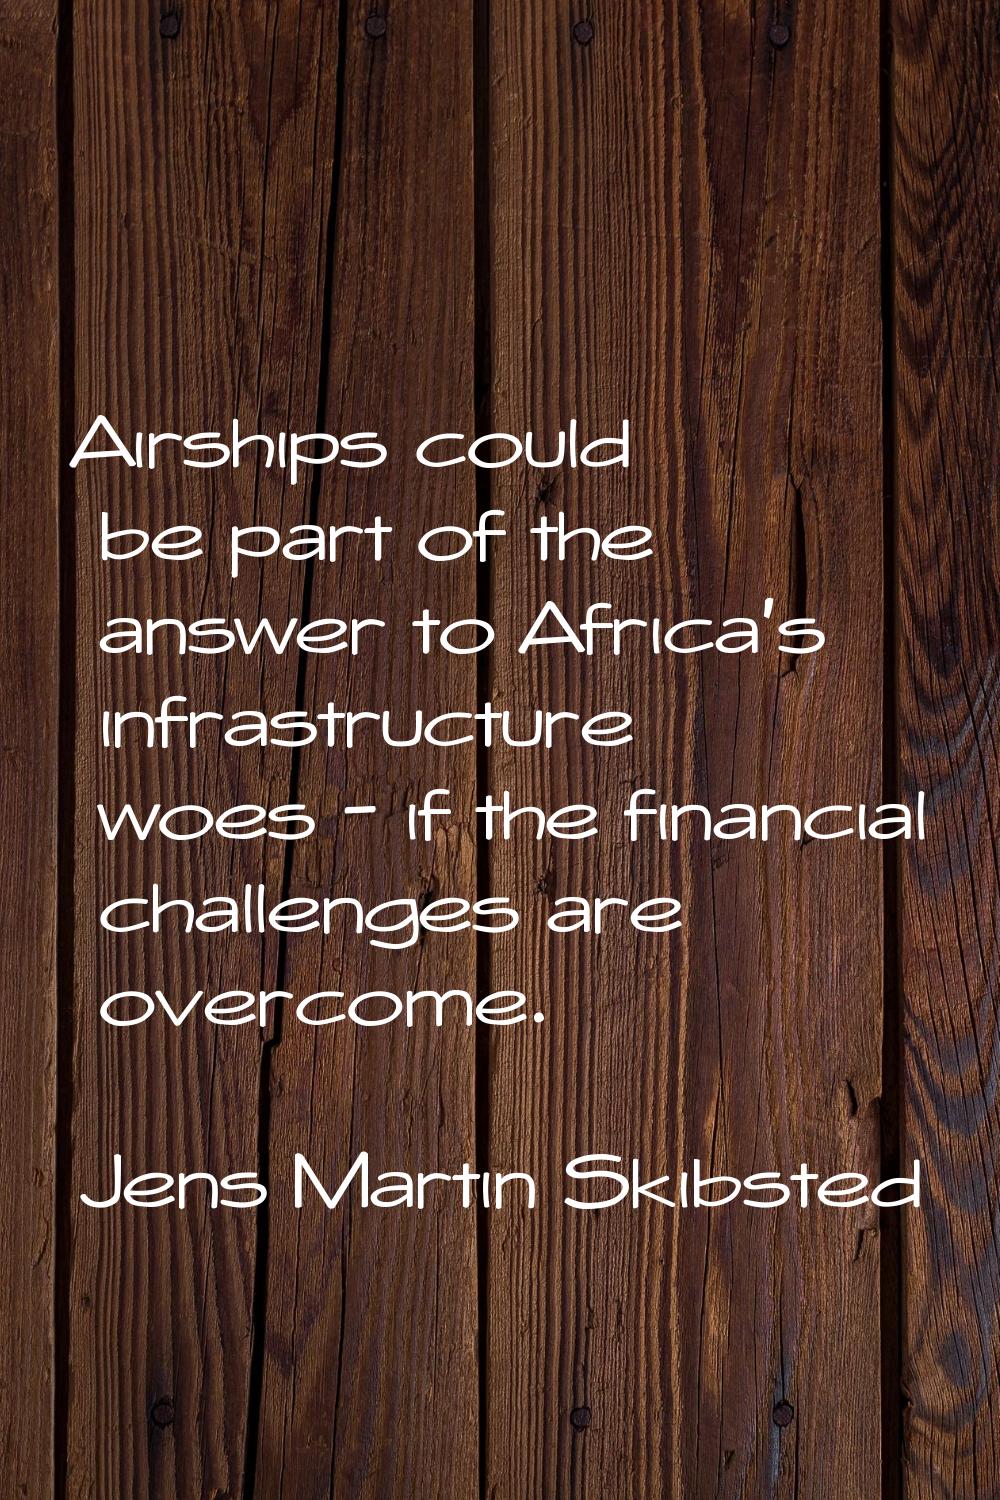 Airships could be part of the answer to Africa's infrastructure woes - if the financial challenges 